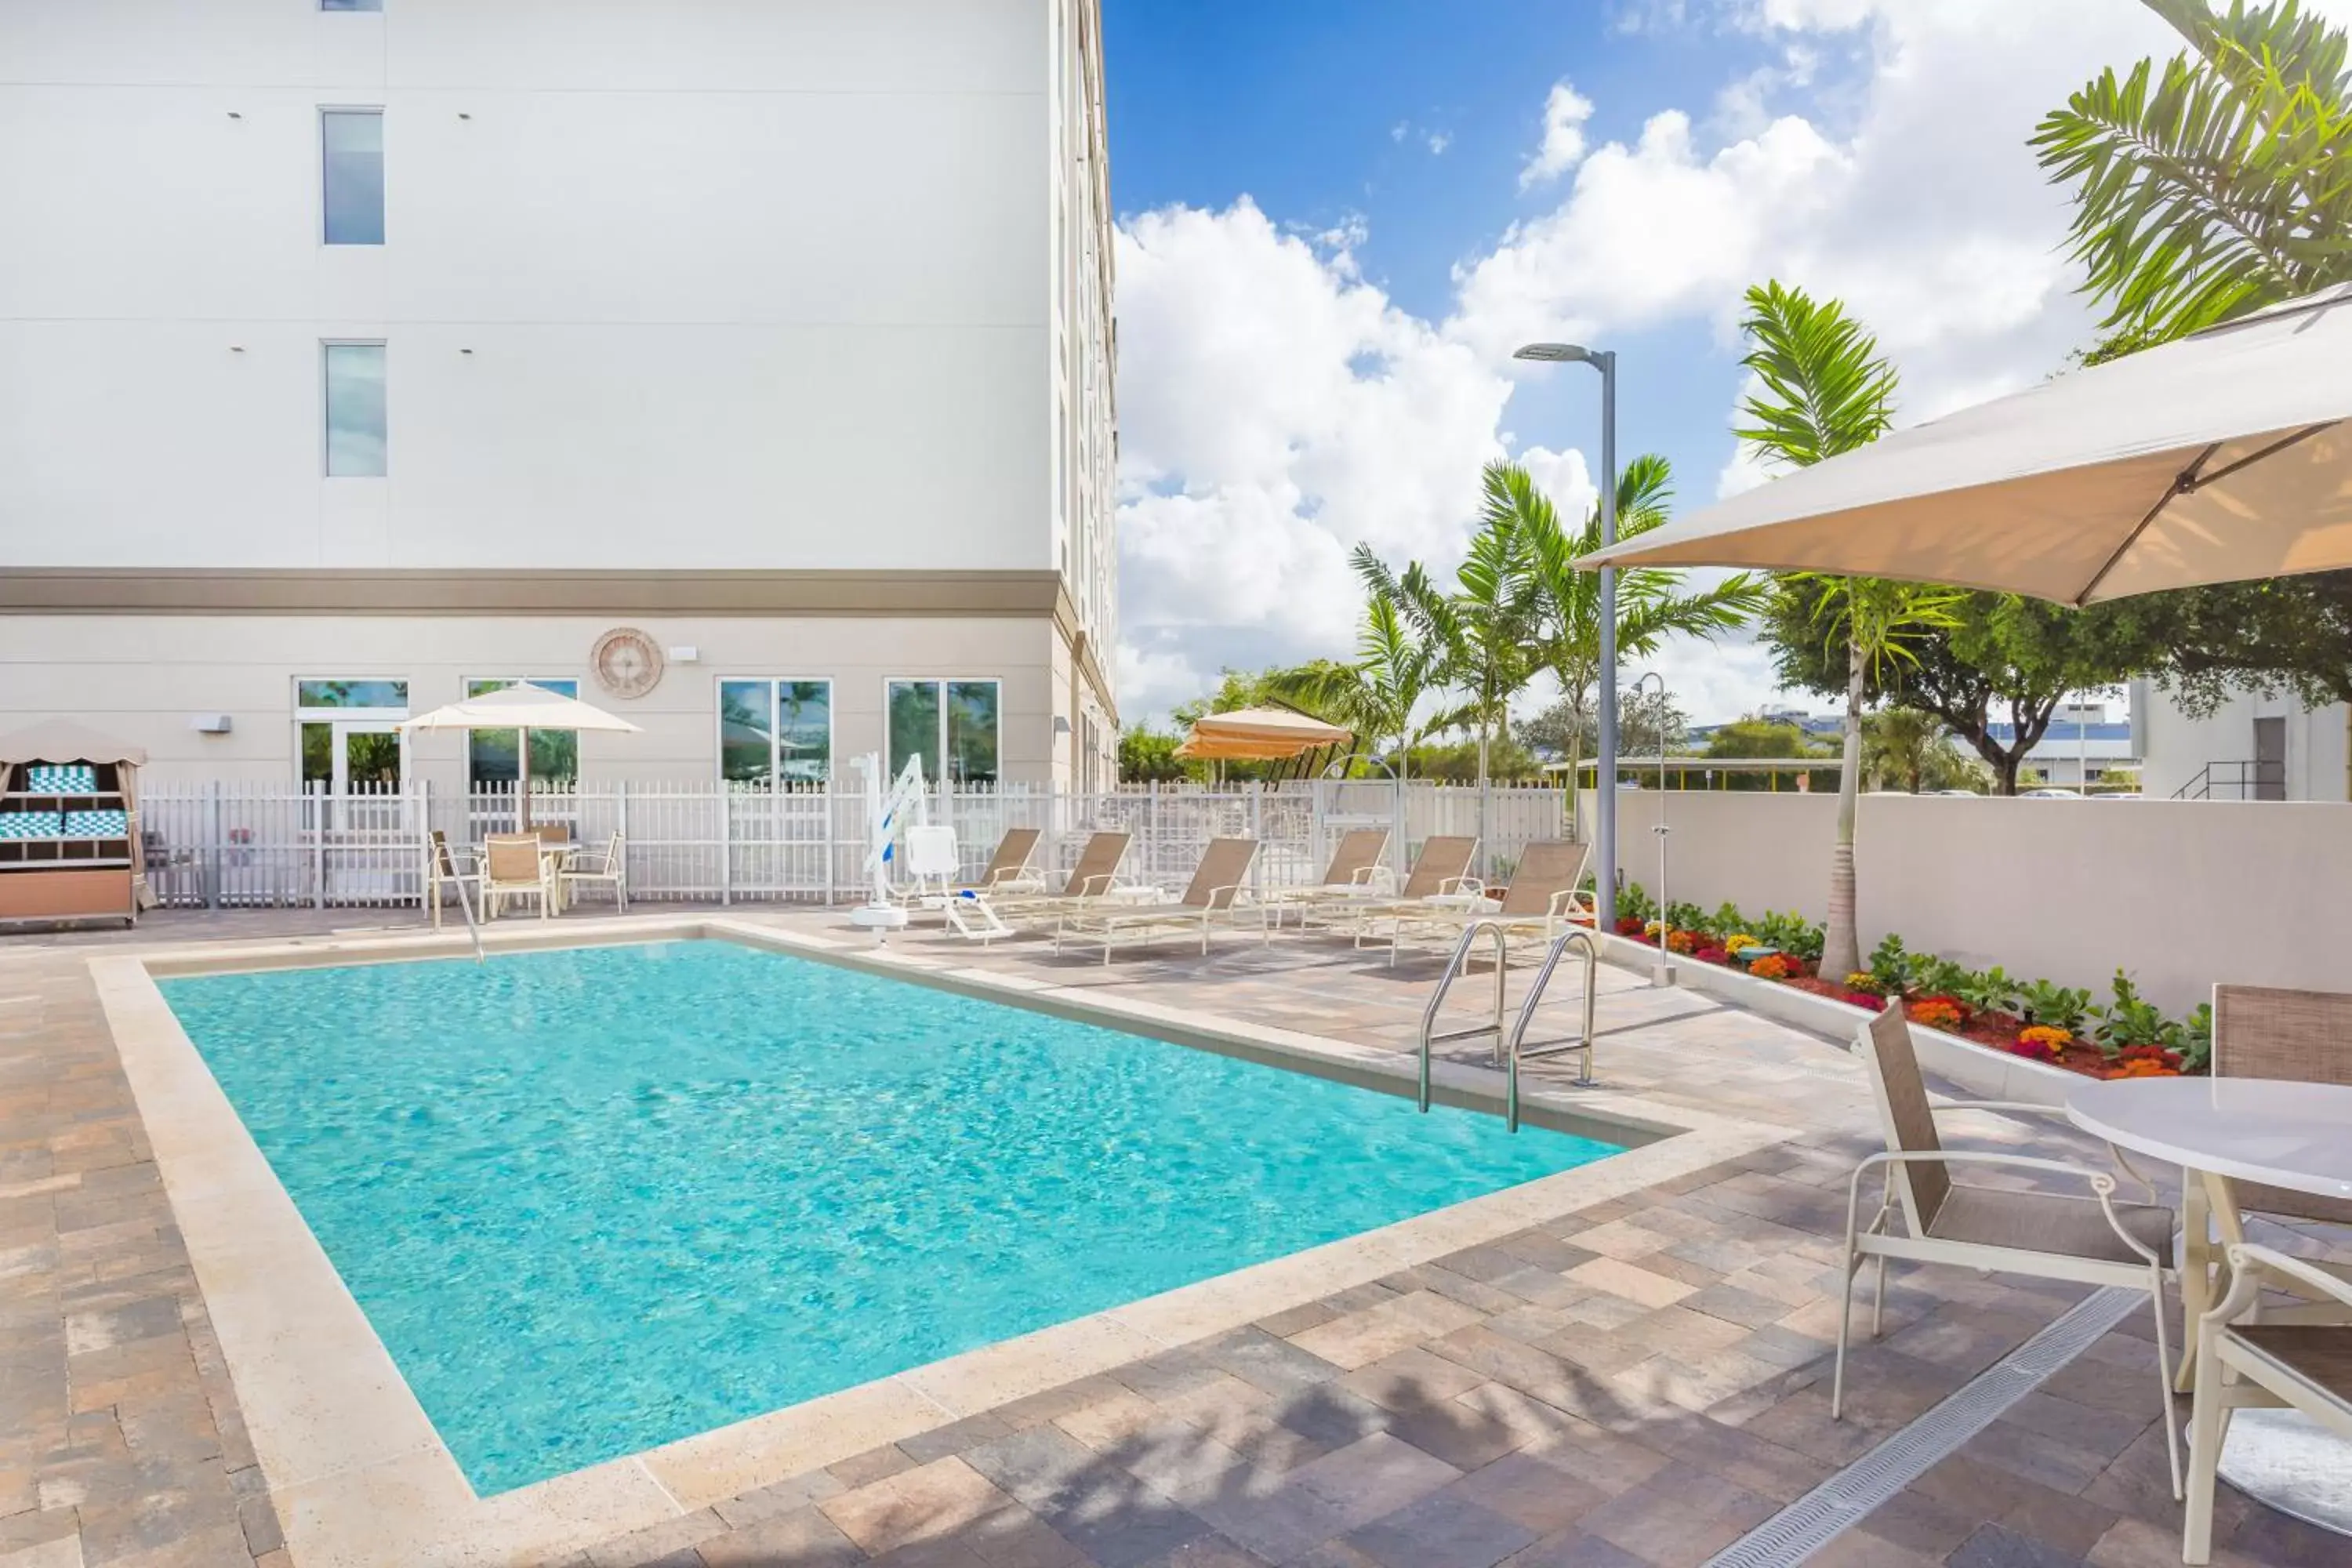 Swimming pool in Wingate by Wyndham Miami Airport